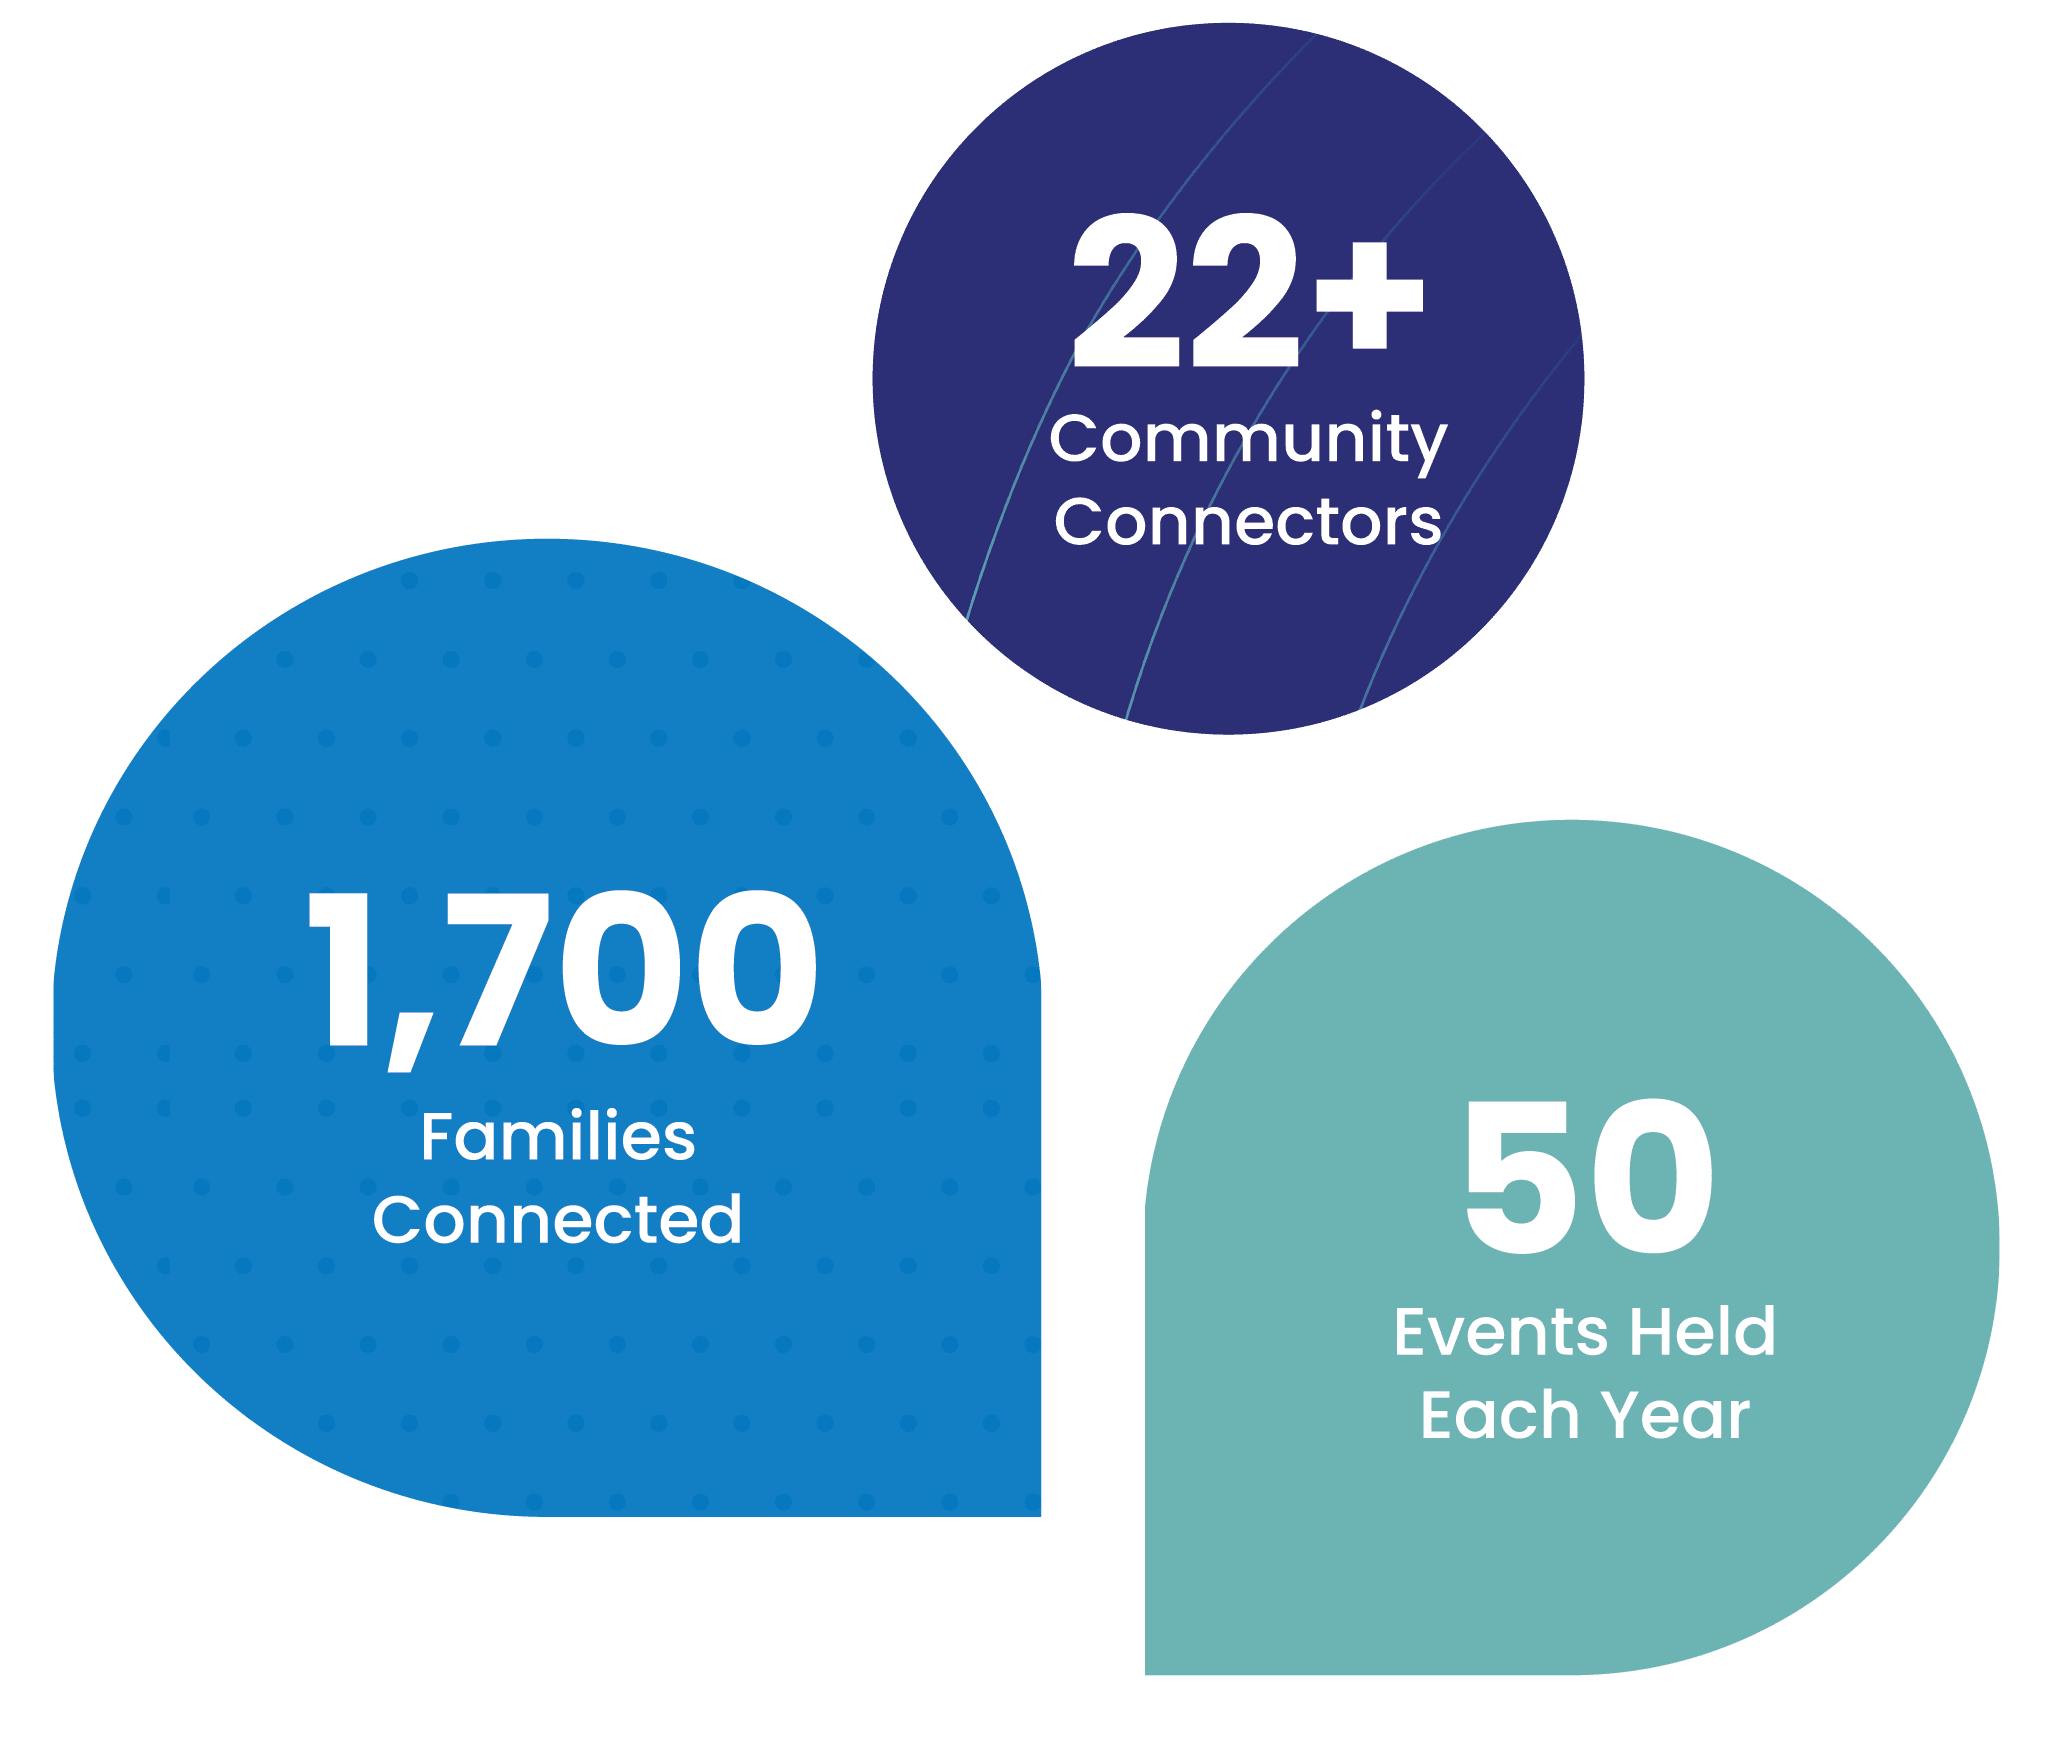 22+ Community Connectors. 1,700 Families Connected. 50 Events Held Each Year.